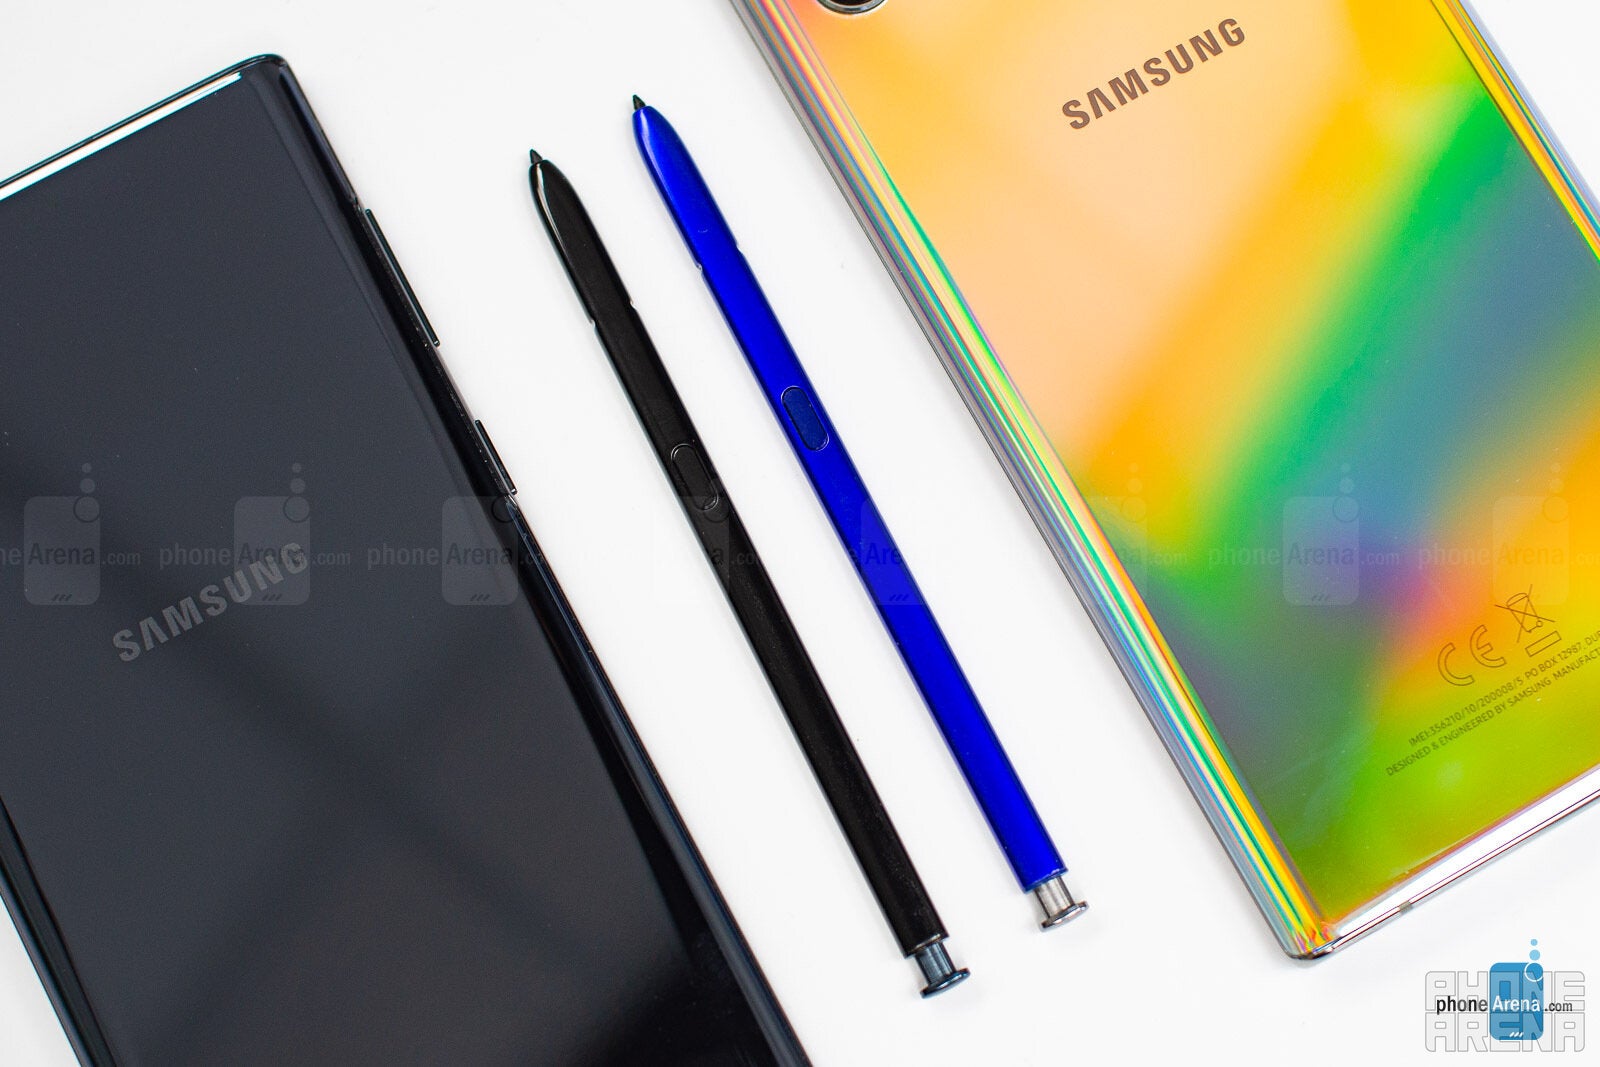 Samsung Galaxy Note 10 Plus review: The most premium Android phone for your  money - CNET